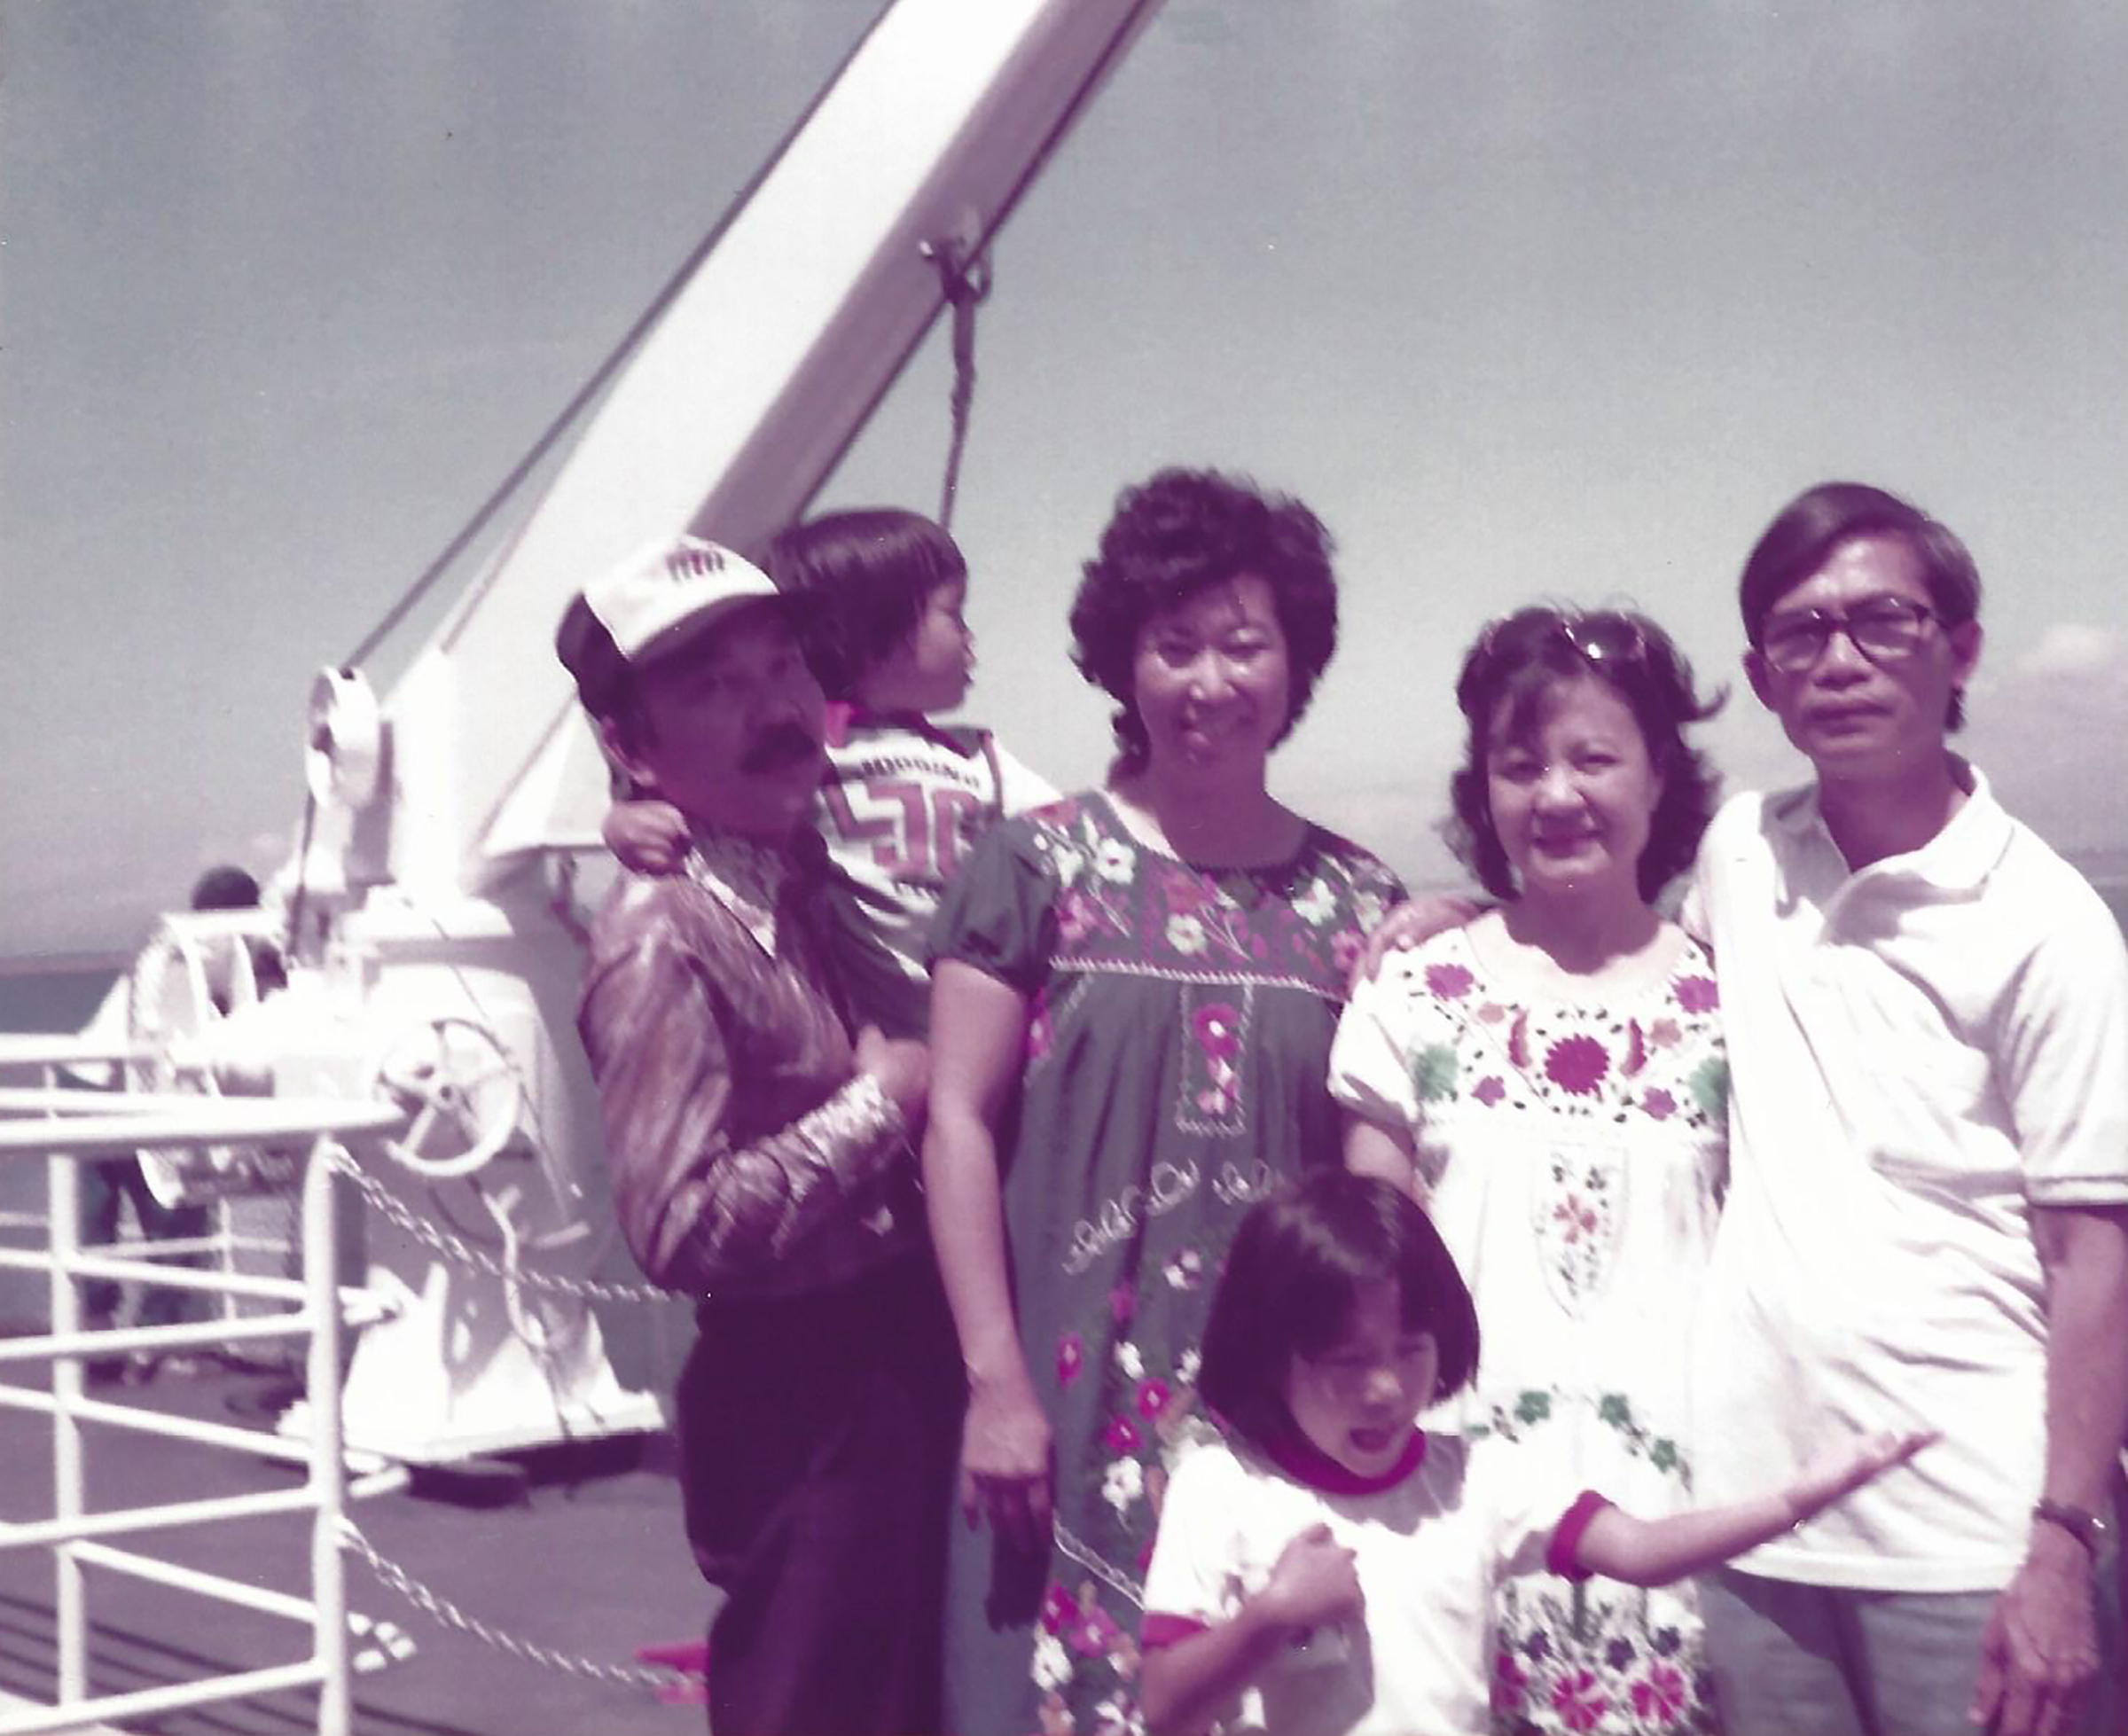 Aimee Phan, center, with, from left, her father, brother, mother, aunt and uncle in Vancouver, Canada, summer 1983.